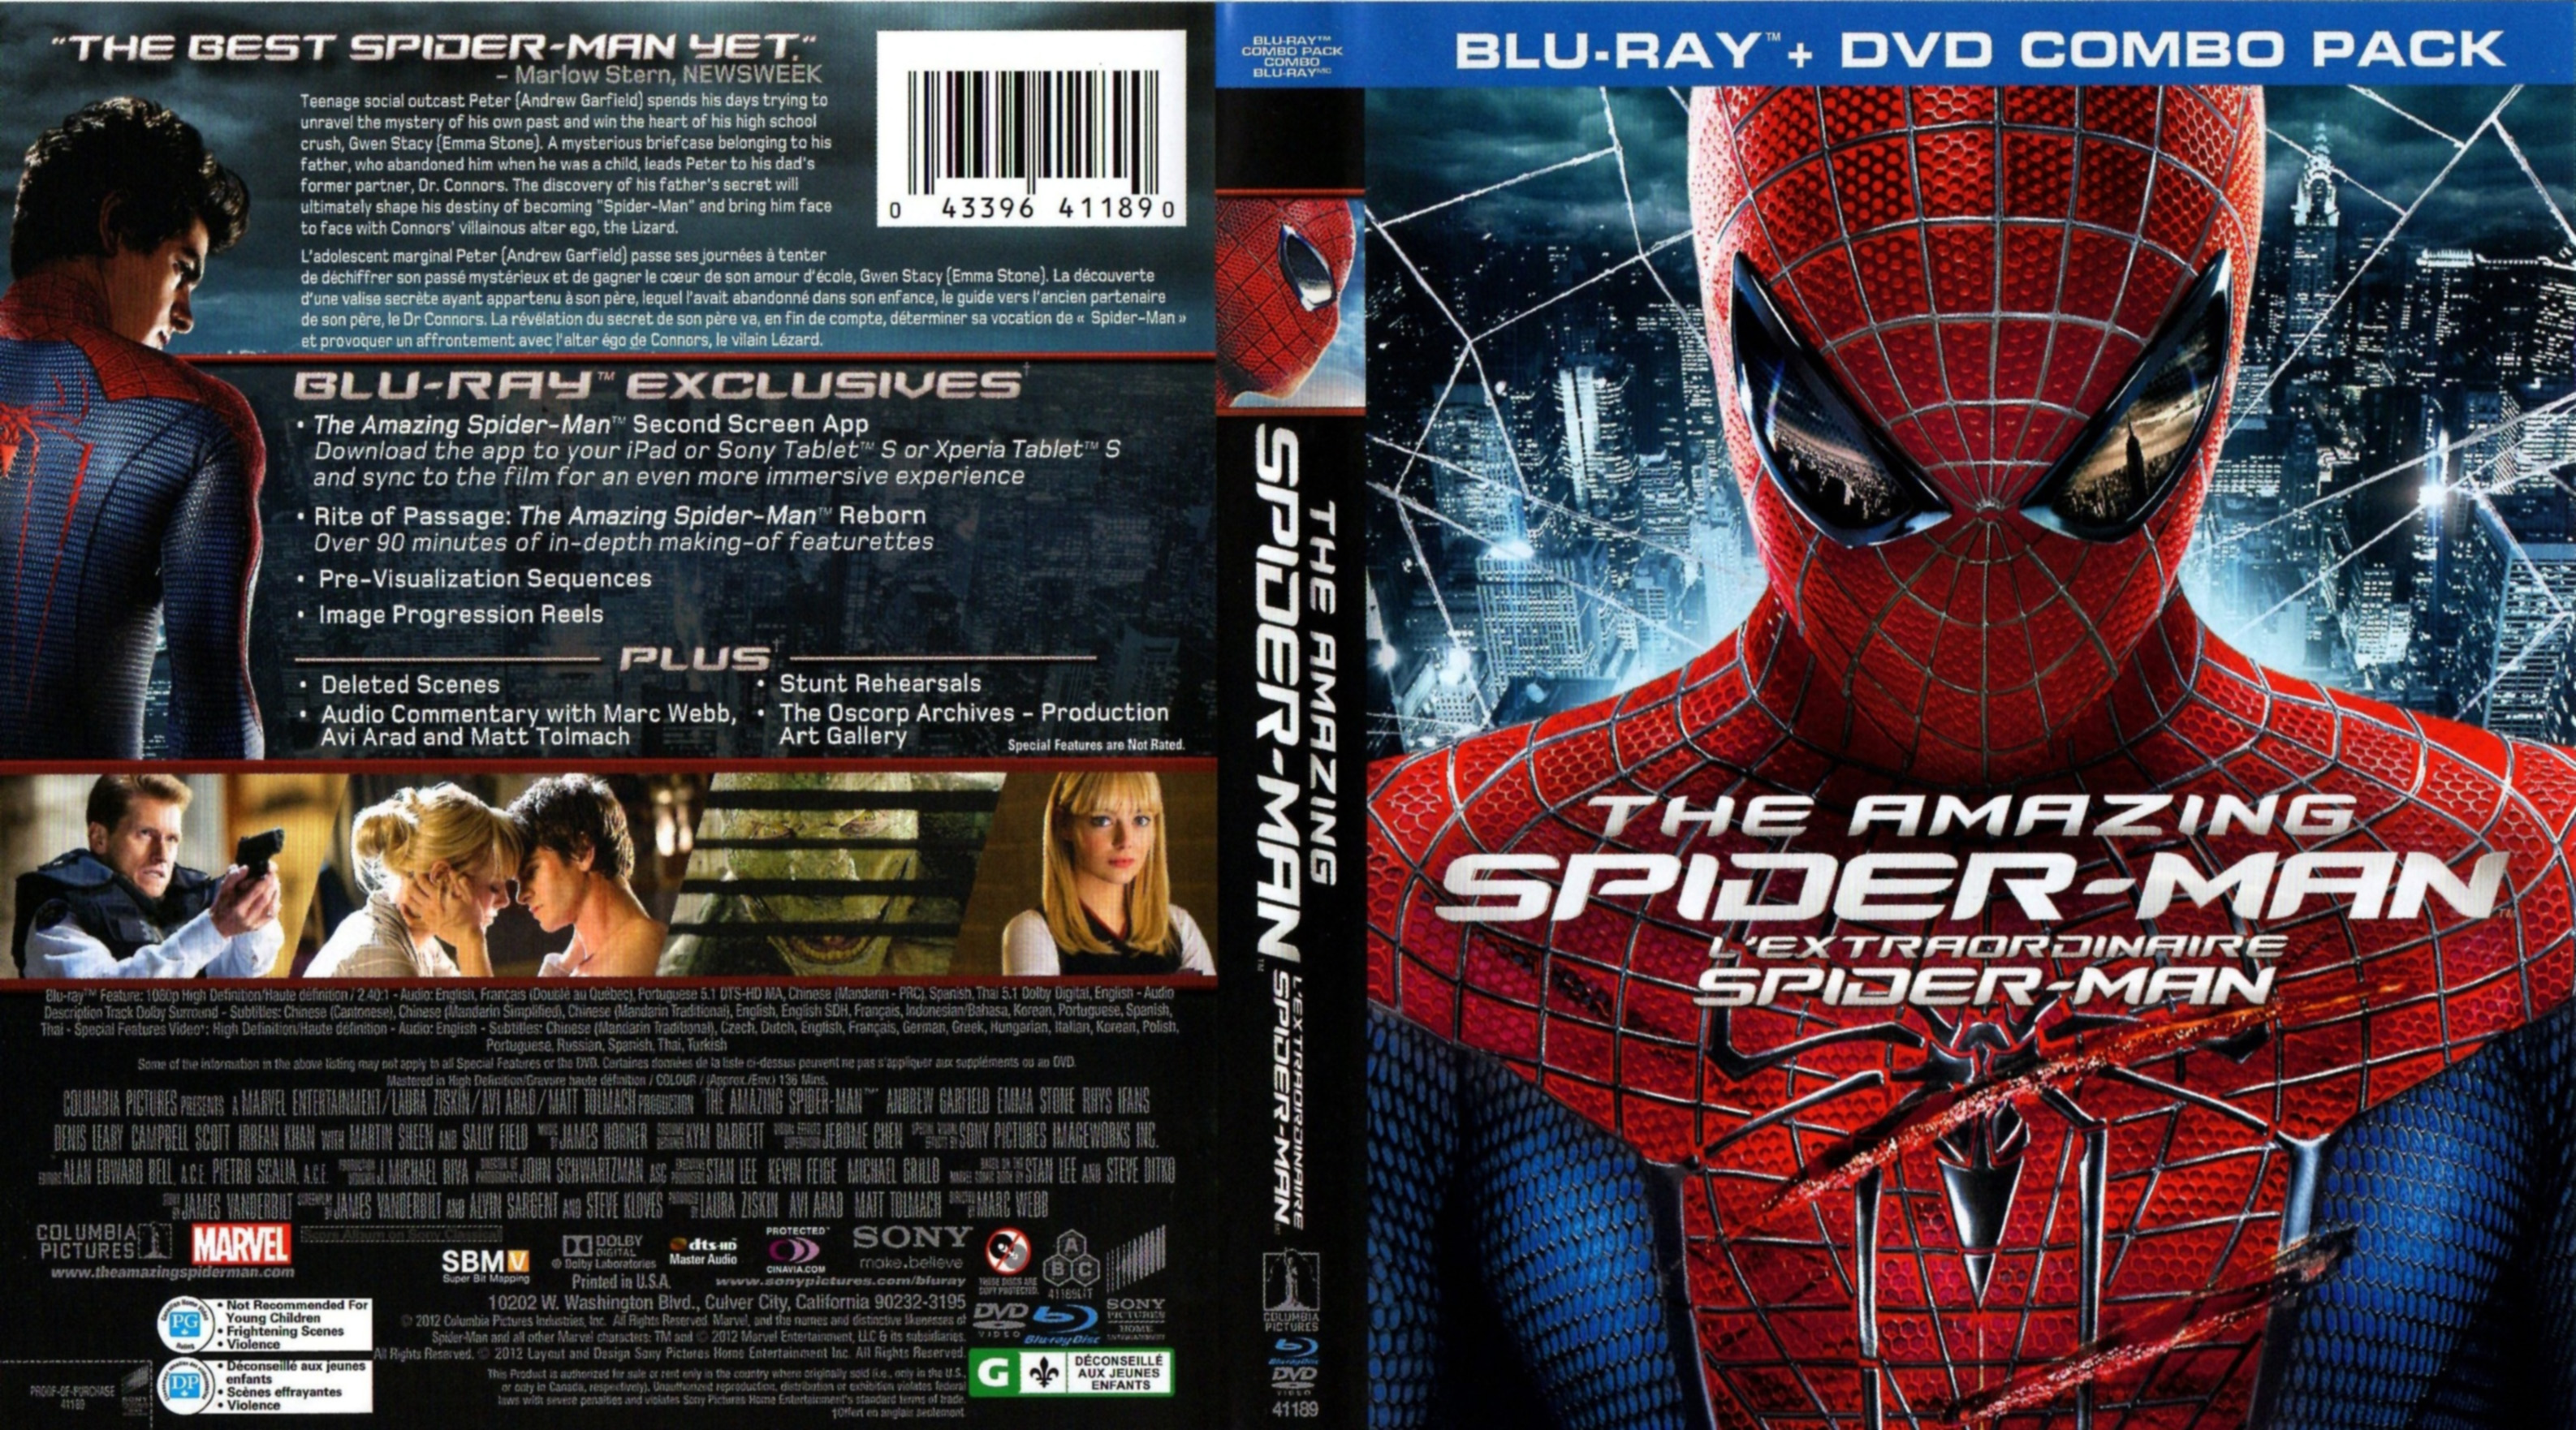 Jaquette DVD The Amazing Spider-Man - L